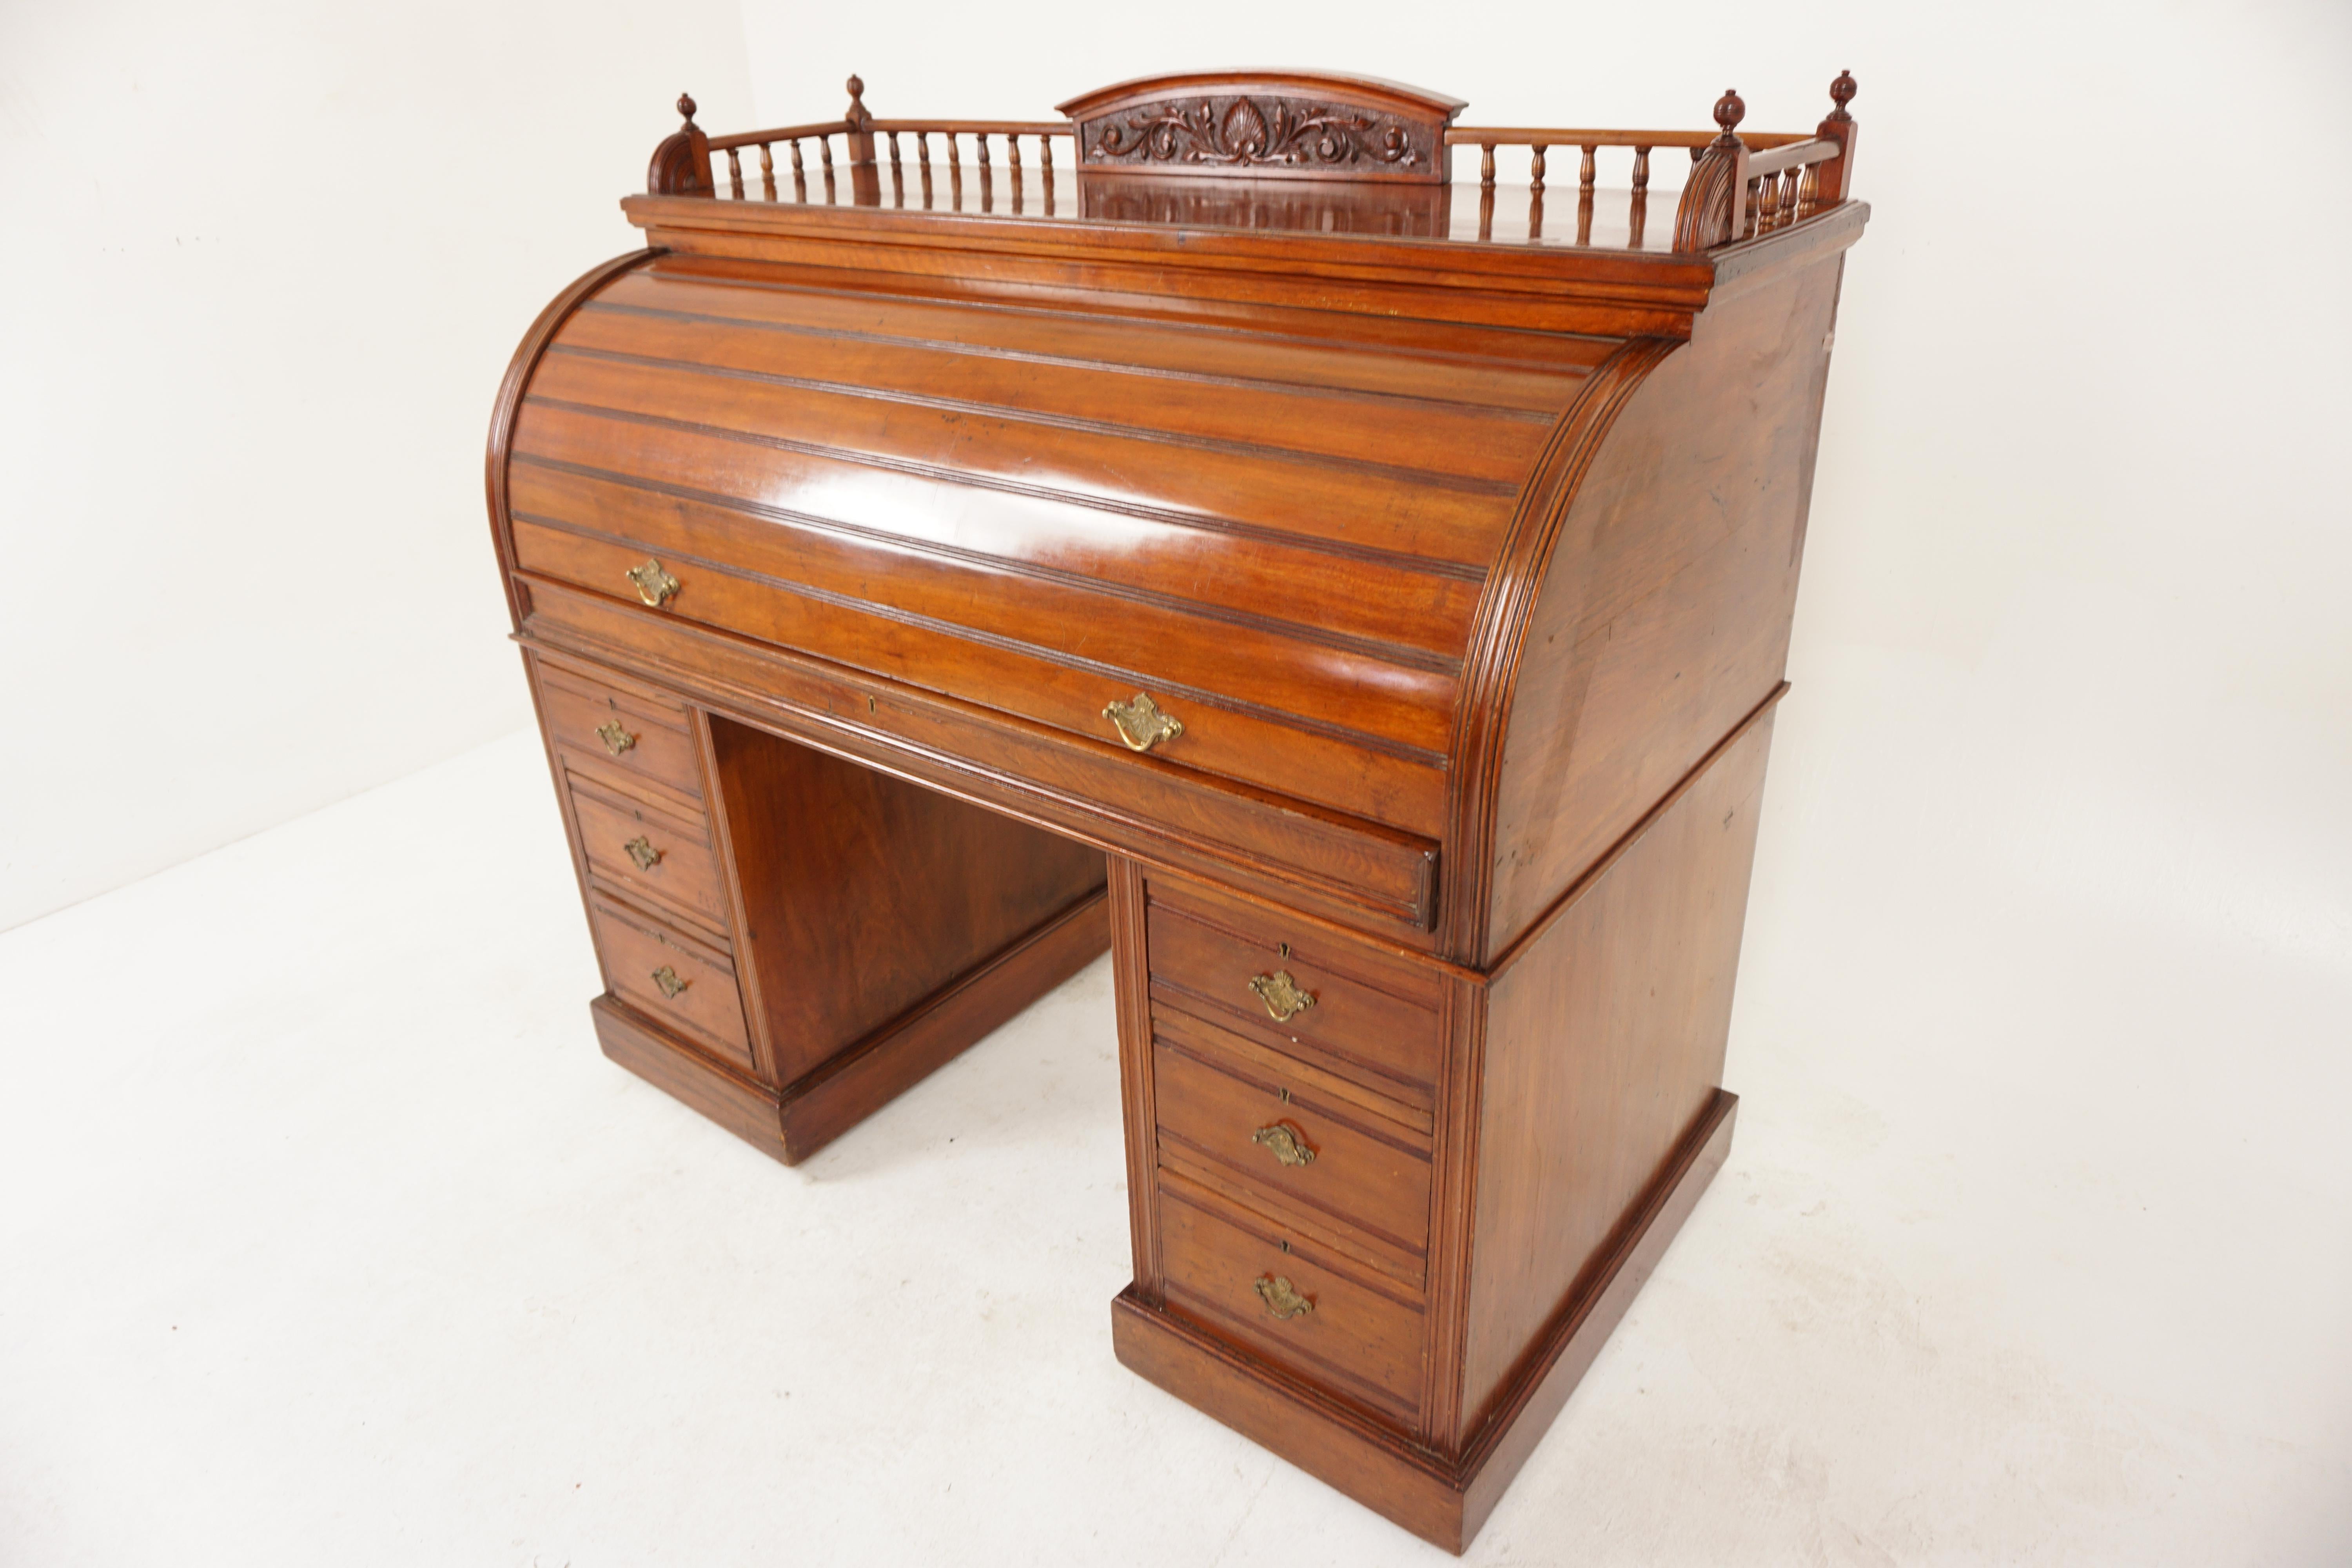 Victorian Walnut Cylinder Desk, Roll Top, Pedestals, Scotland 1890, H1176

Scotland 1890
Solid Walnut
Original Finish
Three quarter carved gallery on top
The cylinder (lockable with key provided) rolls back to reveal a pull out fitted interior
with